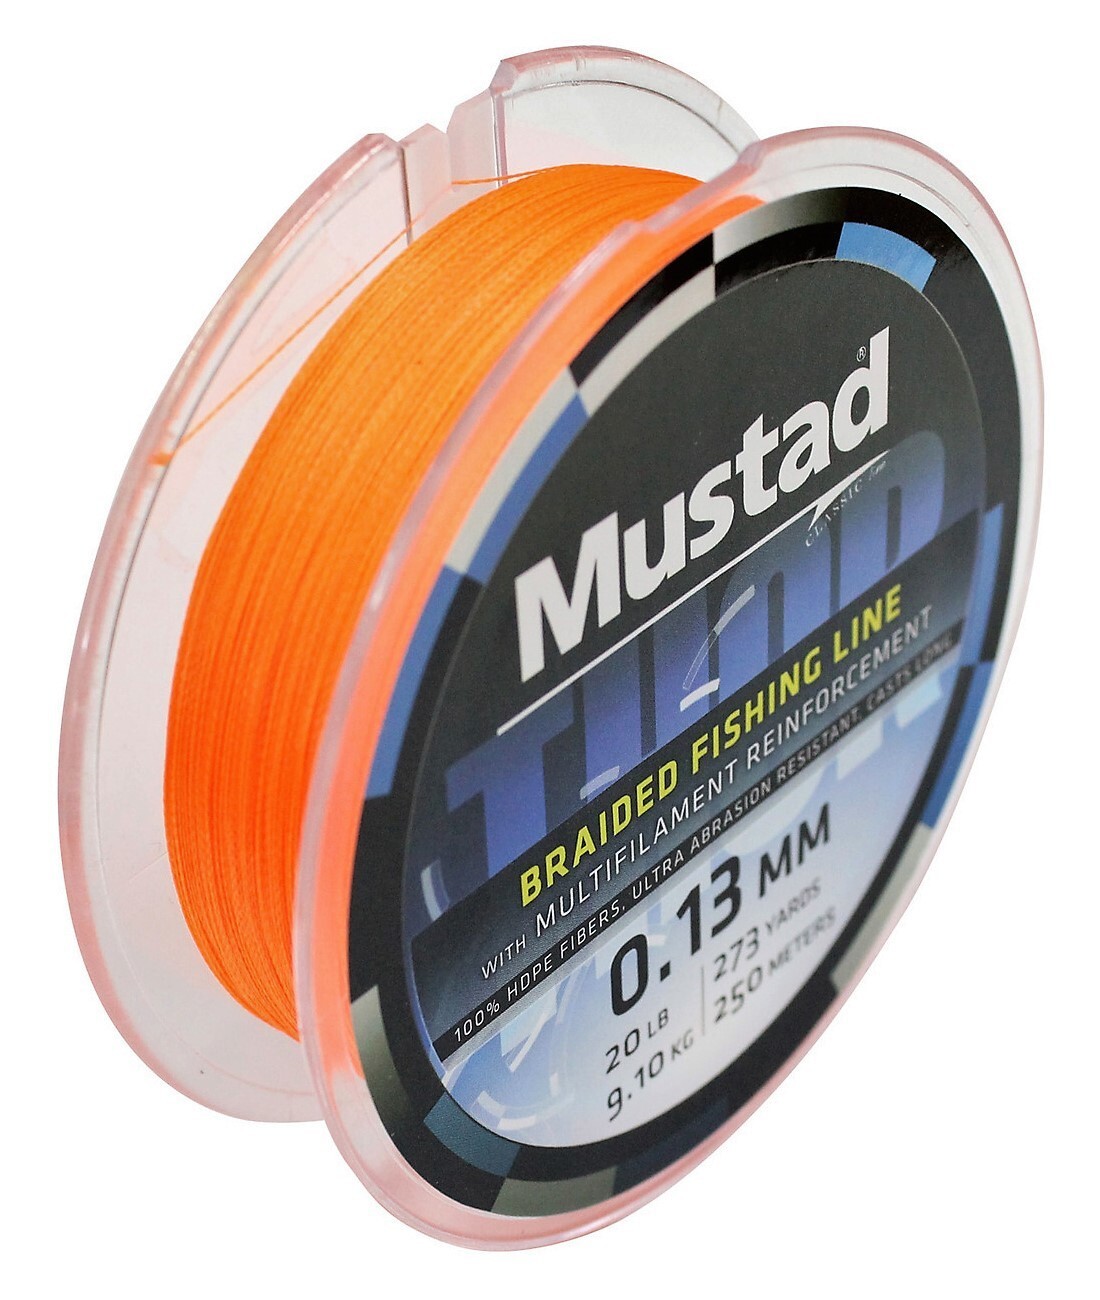 Mustad Thor Monofilament Clear Fishing Line 15 LB 795 YDS NEW SEALED